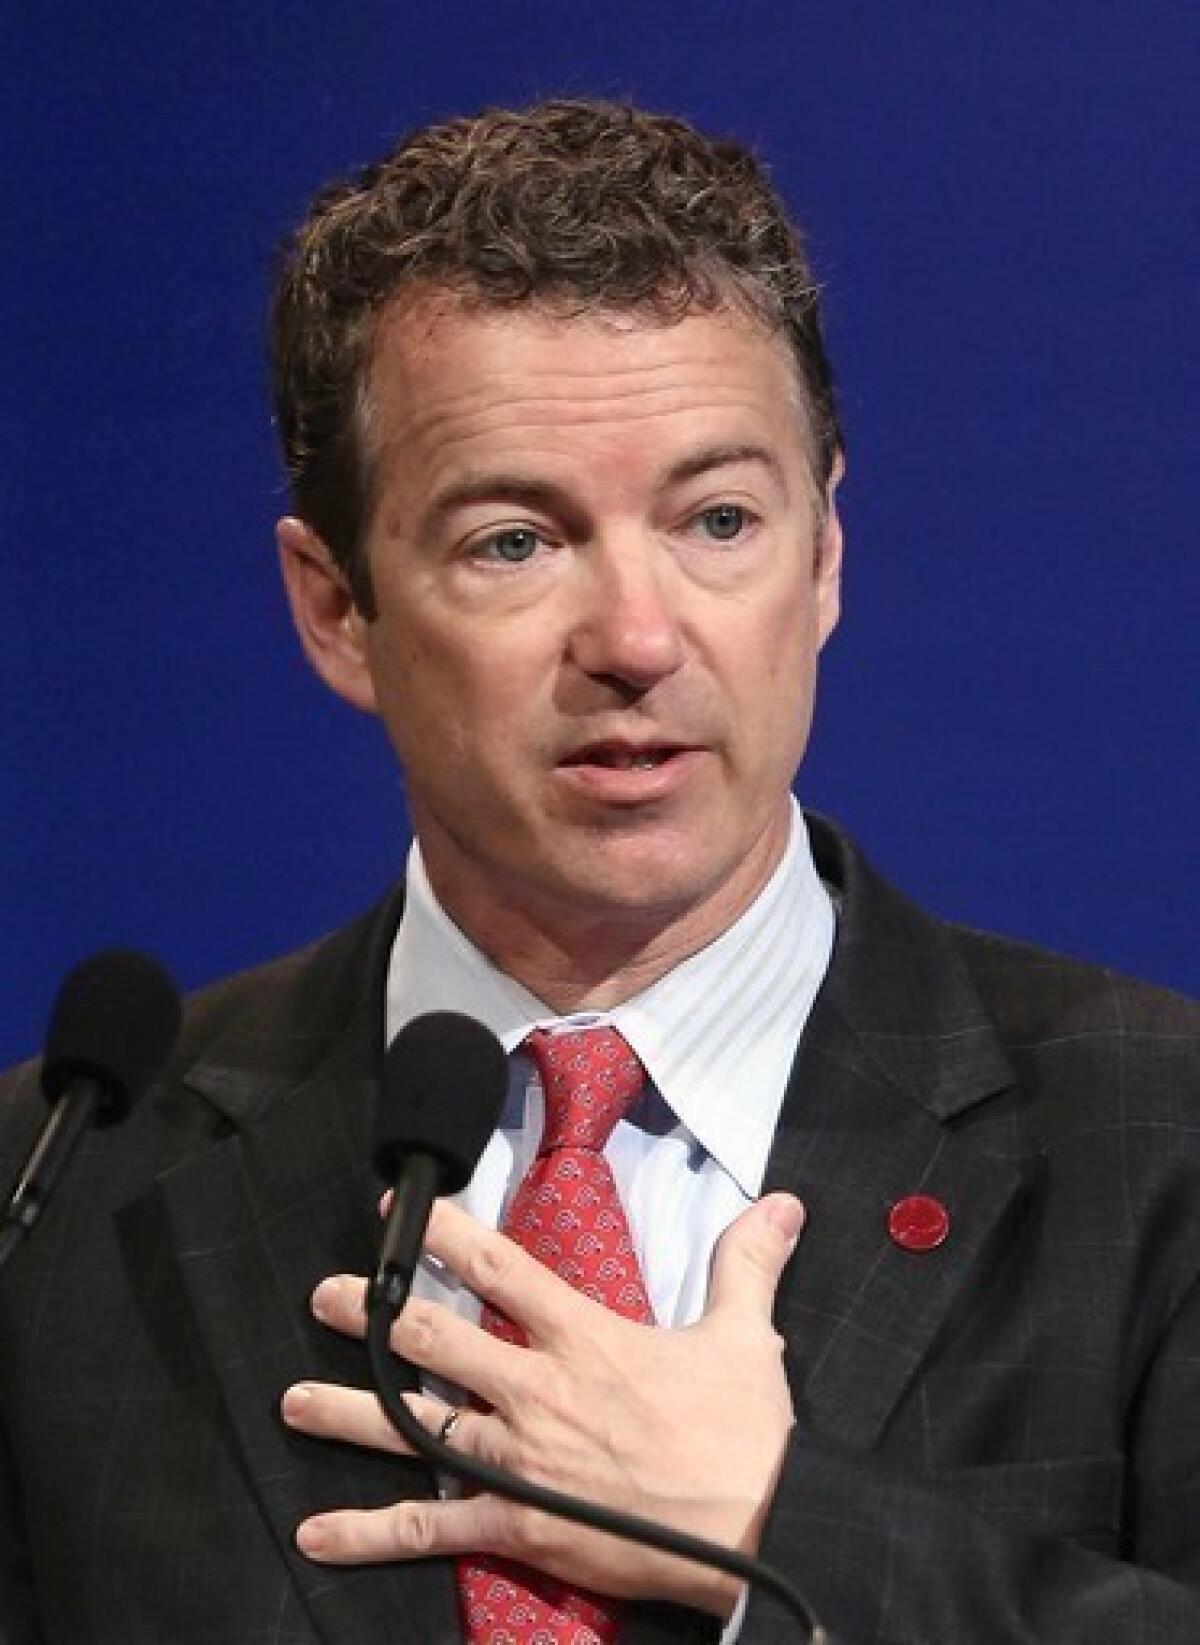 Sen. Rand Paul (R-Ky.), in a speech in Washington, urged Republicans to support reform of the nation's immigration laws.